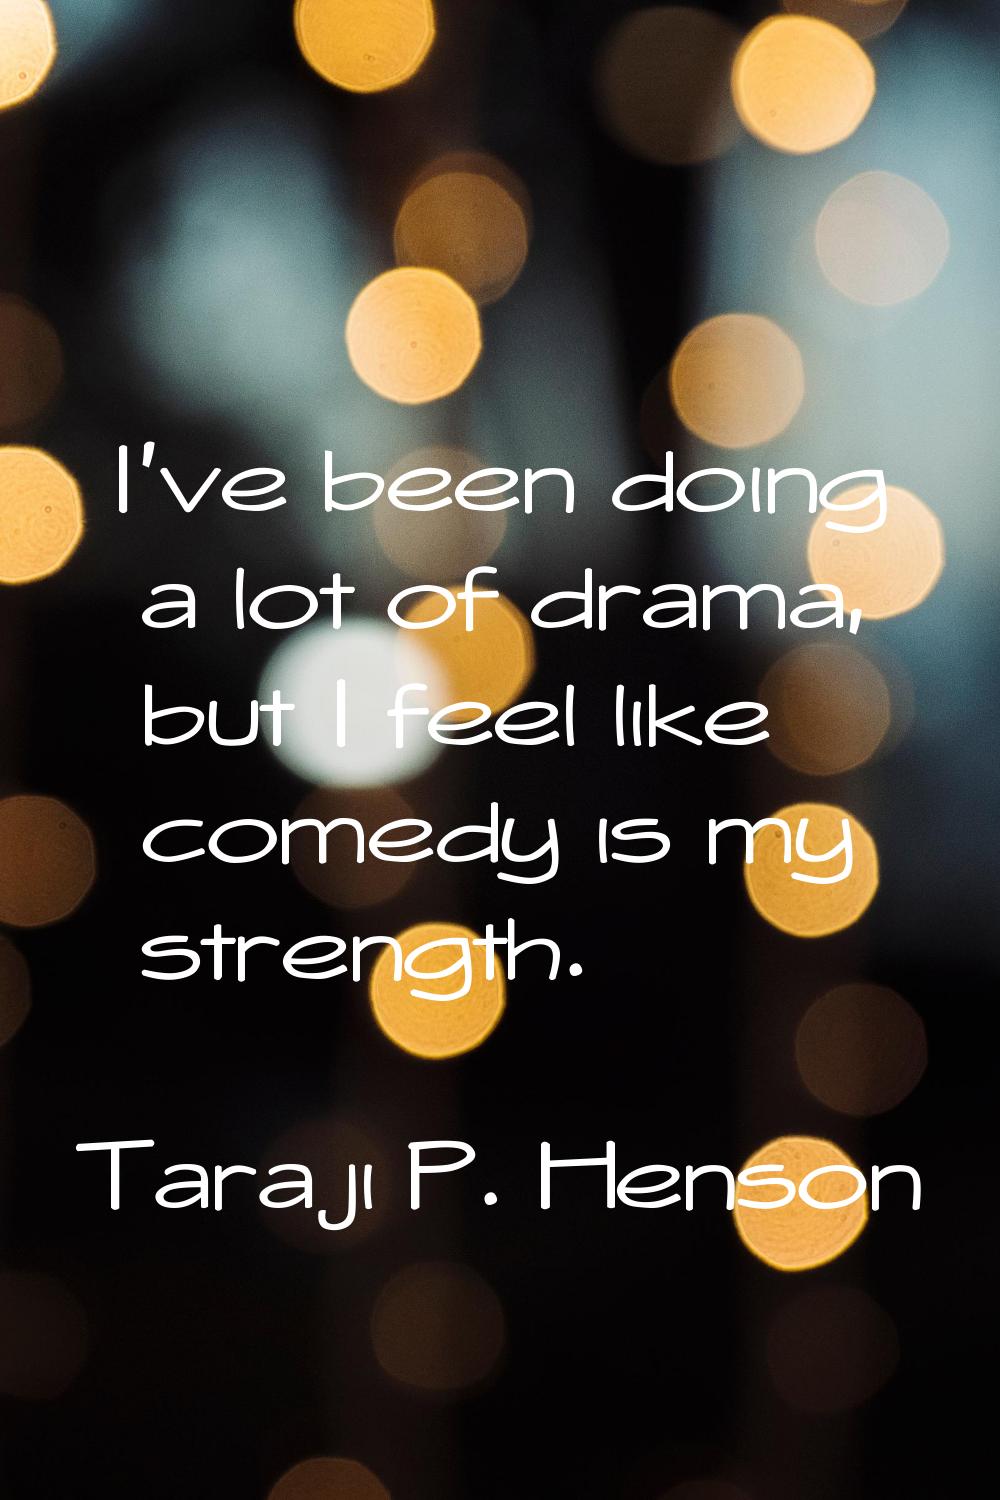 I've been doing a lot of drama, but I feel like comedy is my strength.